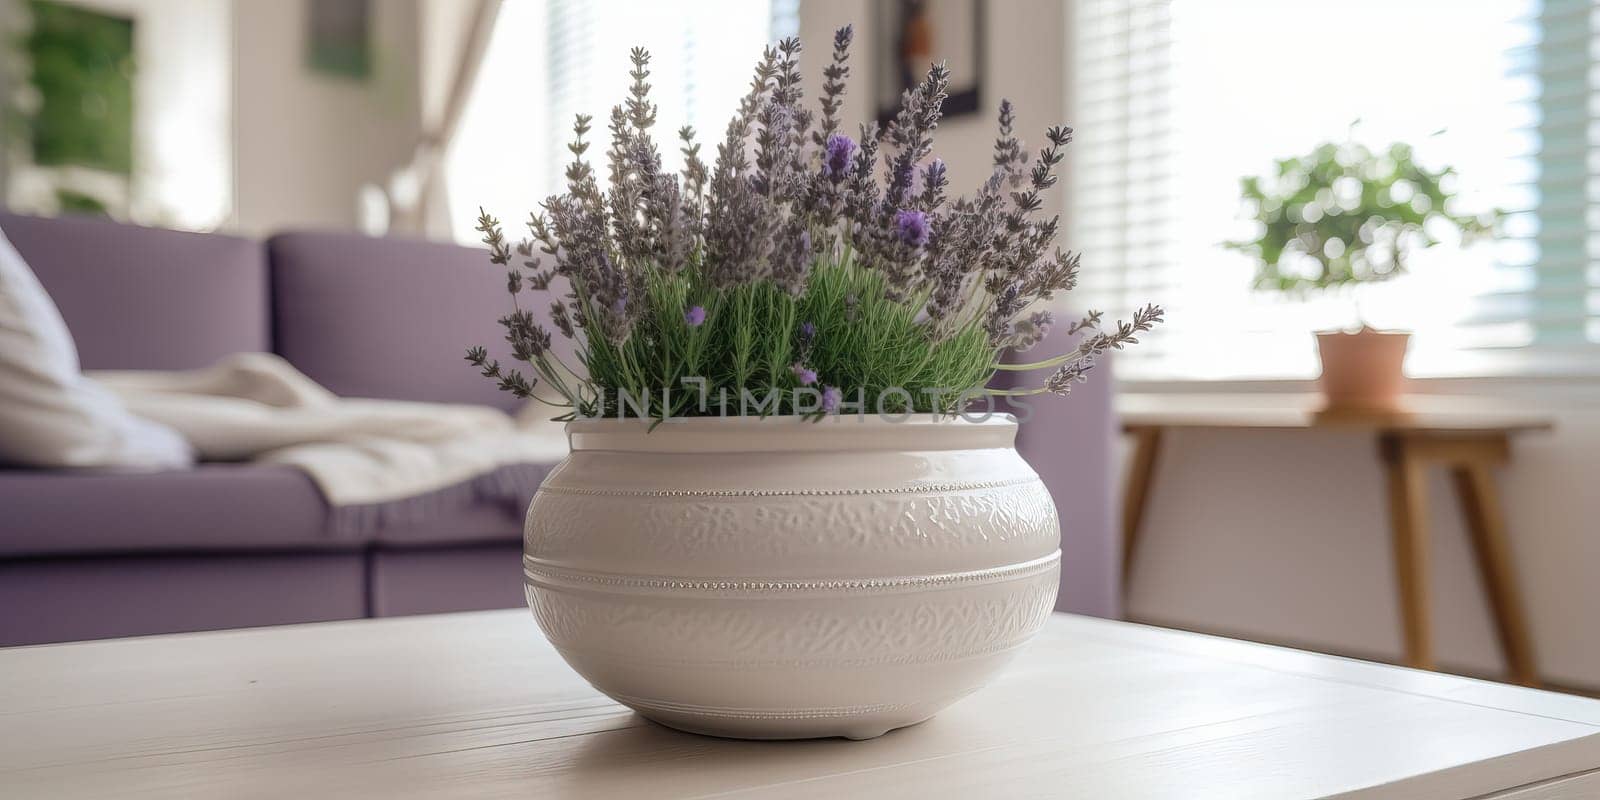 Beautiful White Pot With Growing Lavender On A Table In Living Room by tan4ikk1